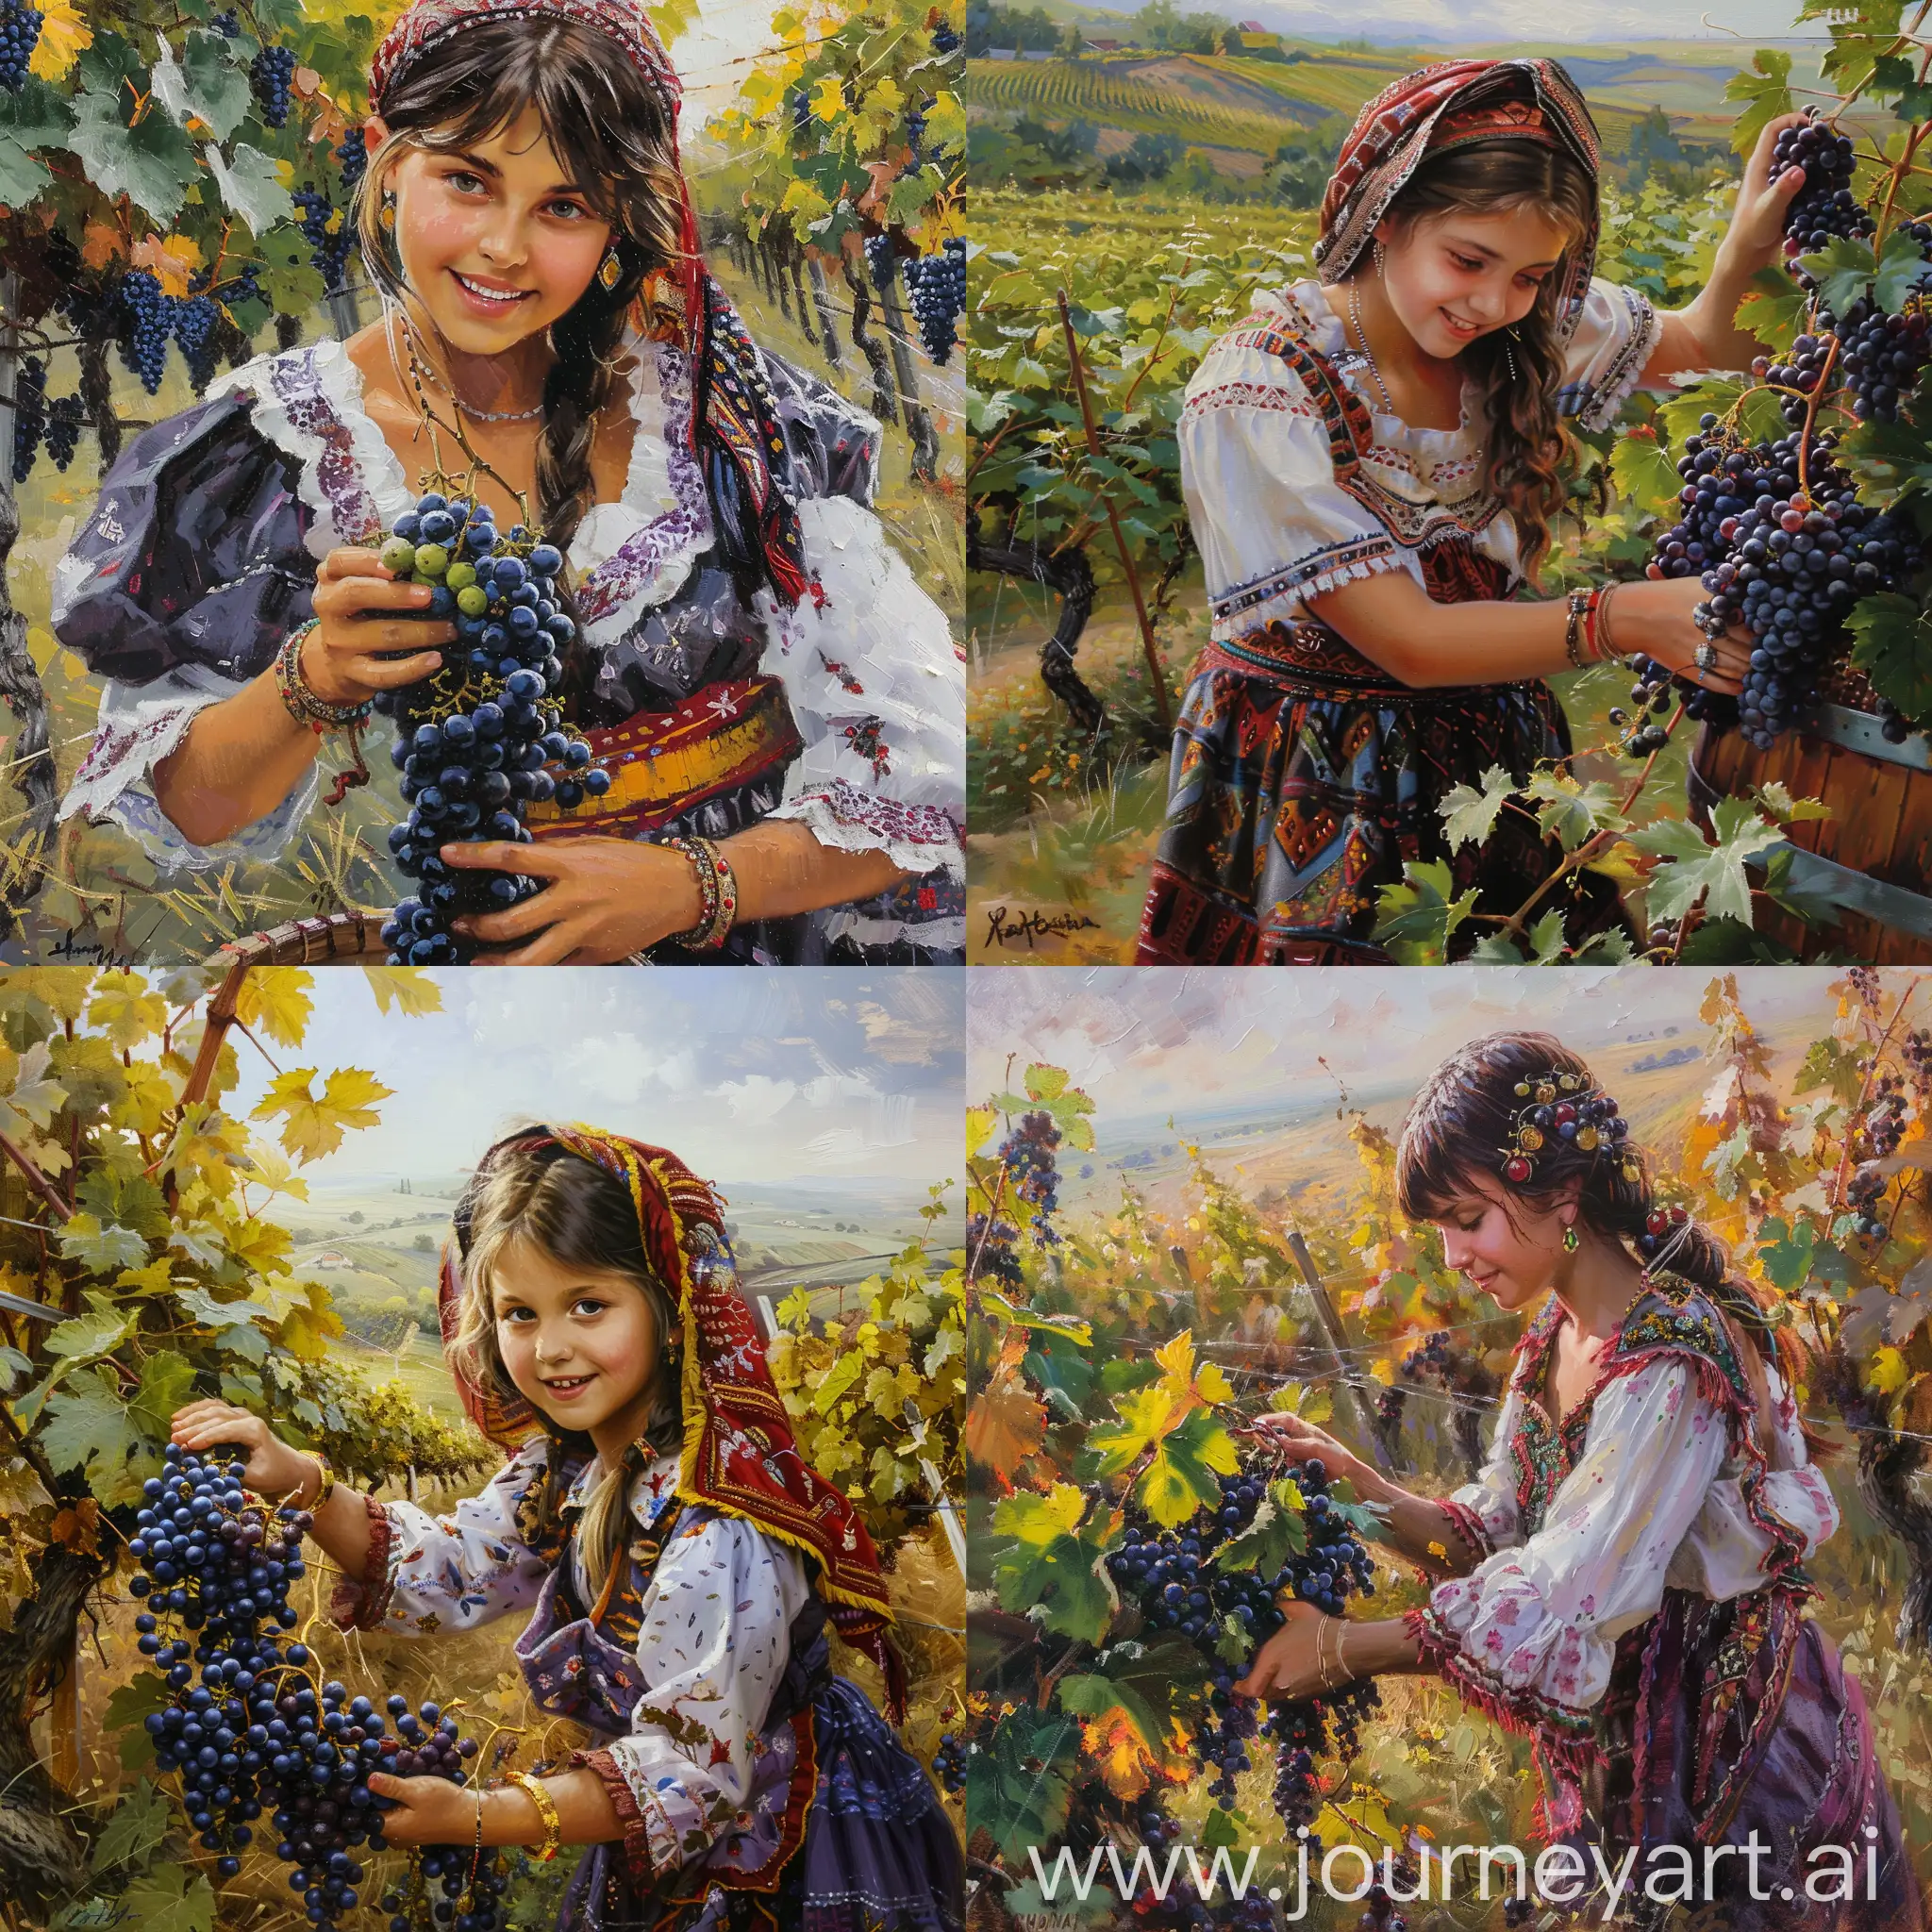 Moldovan-Girl-Gathering-Grapes-in-Traditional-Clothing-UltraDetailed-8K-Oil-Painting